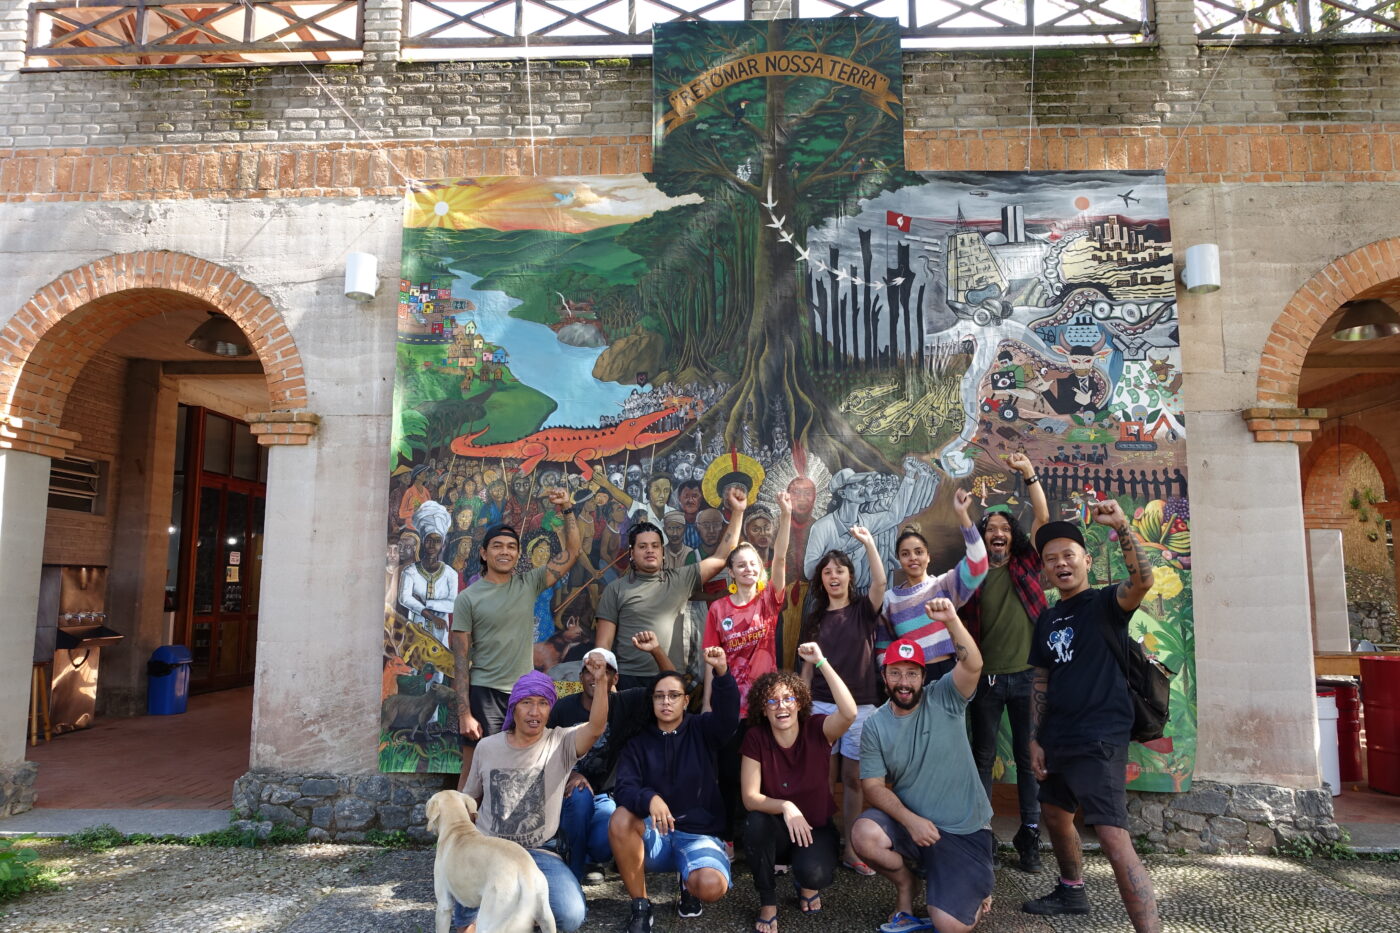 Taring Padi and members of Casa do Povo and MST in front of the artwork they made together during the residency. Image courtesy of Taring Padi.